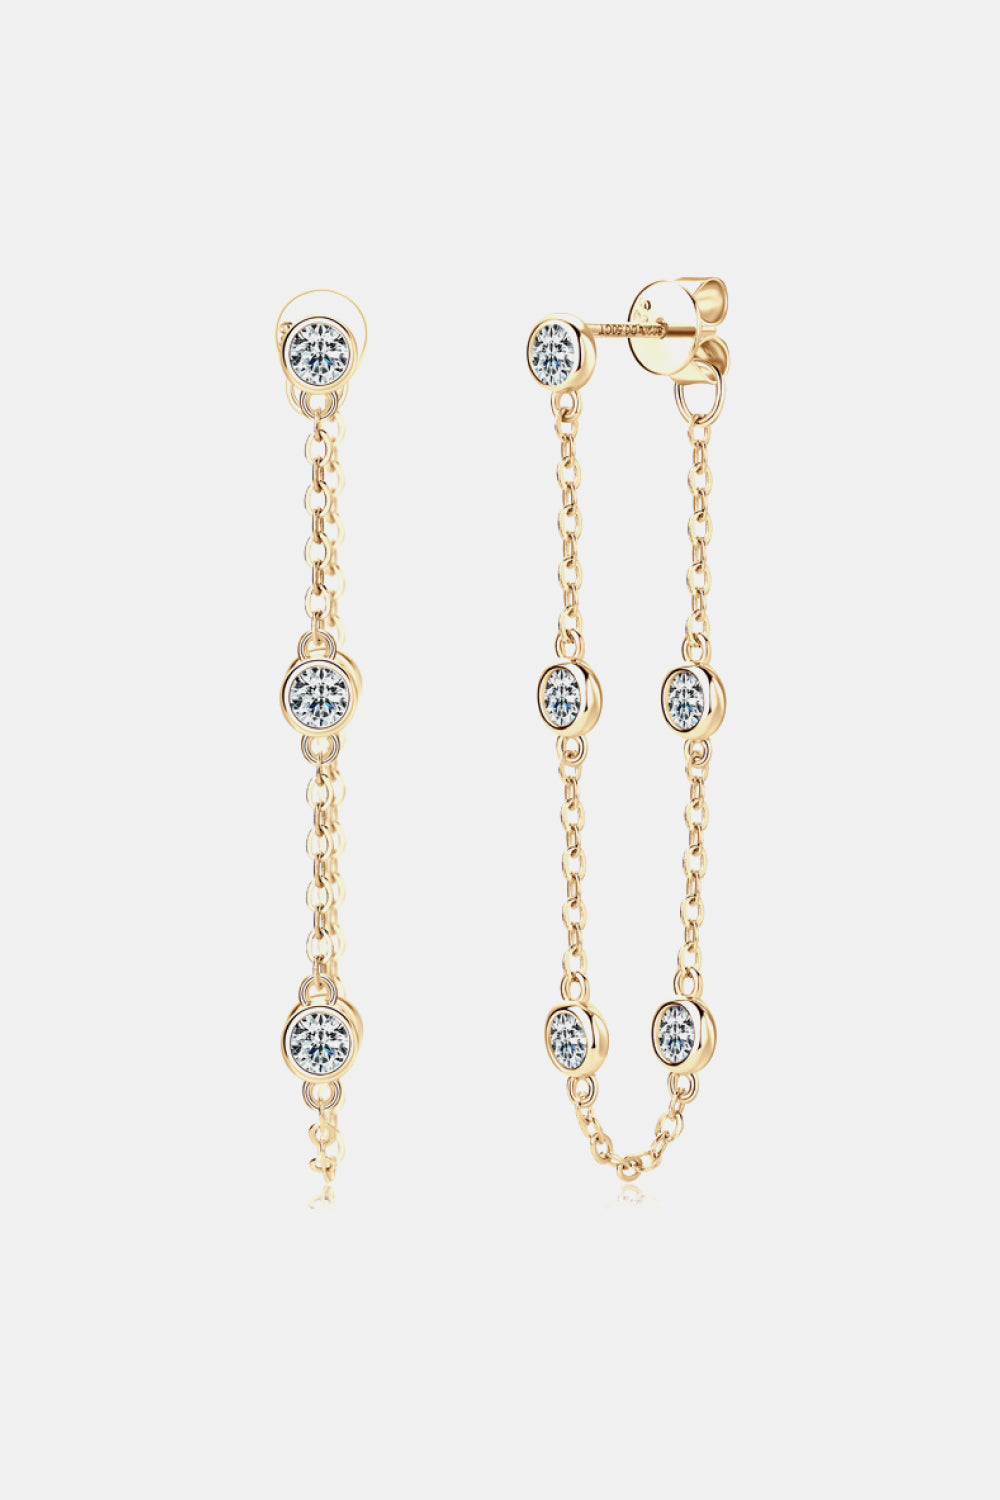 1 Carat Moissanite 925 Sterling Silver Chain Earrings-Earrings-Inspired by Justeen-Women's Clothing Boutique in Chicago, Illinois